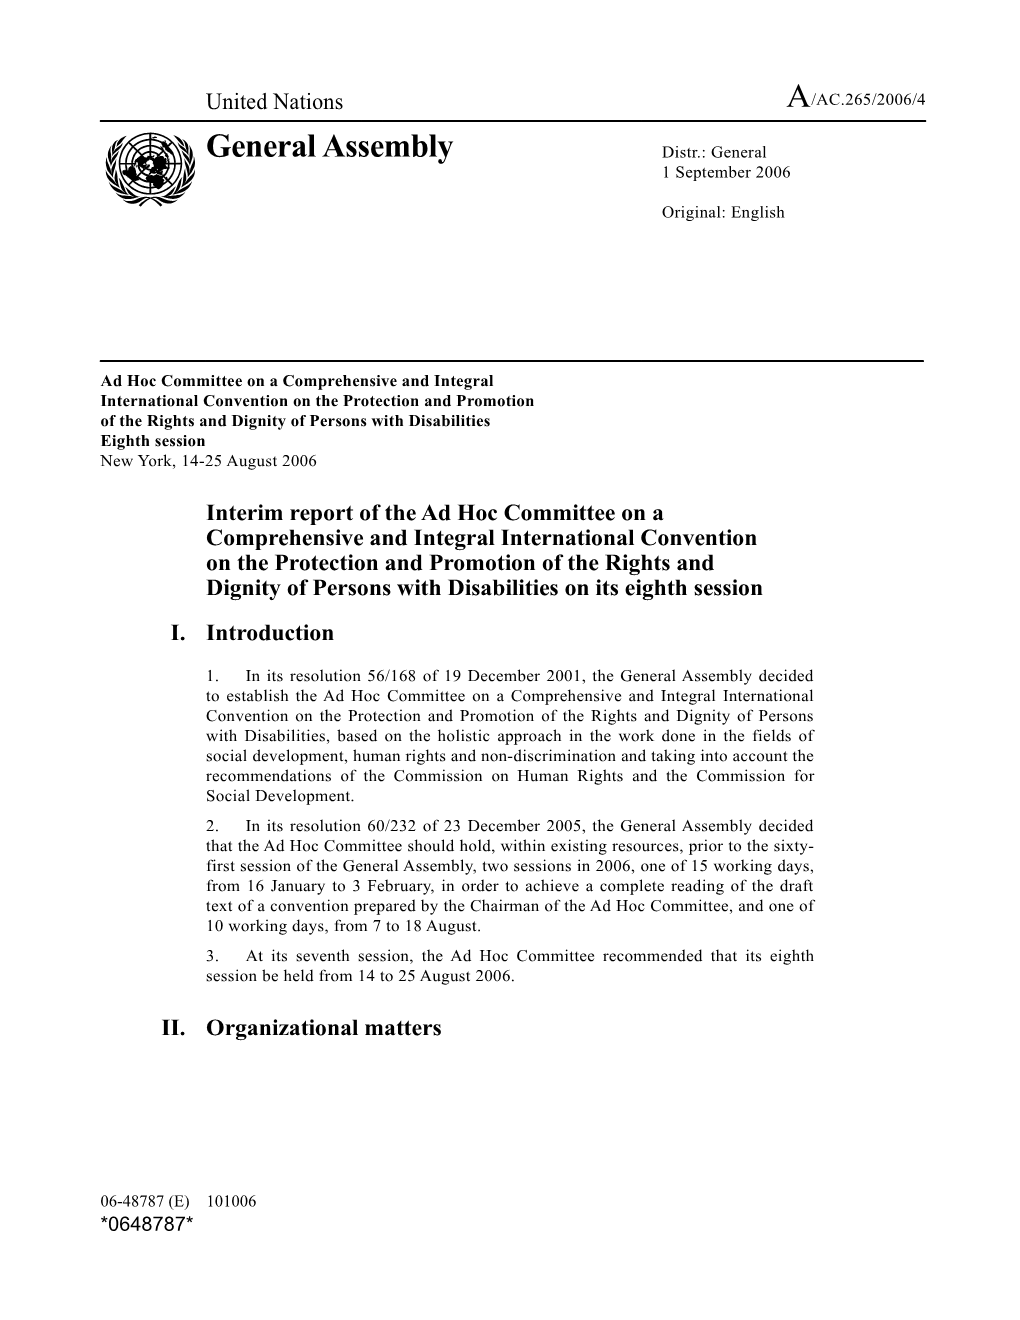 Ad Hoc Committee on a Comprehensive and Integral International Convention on the Protection